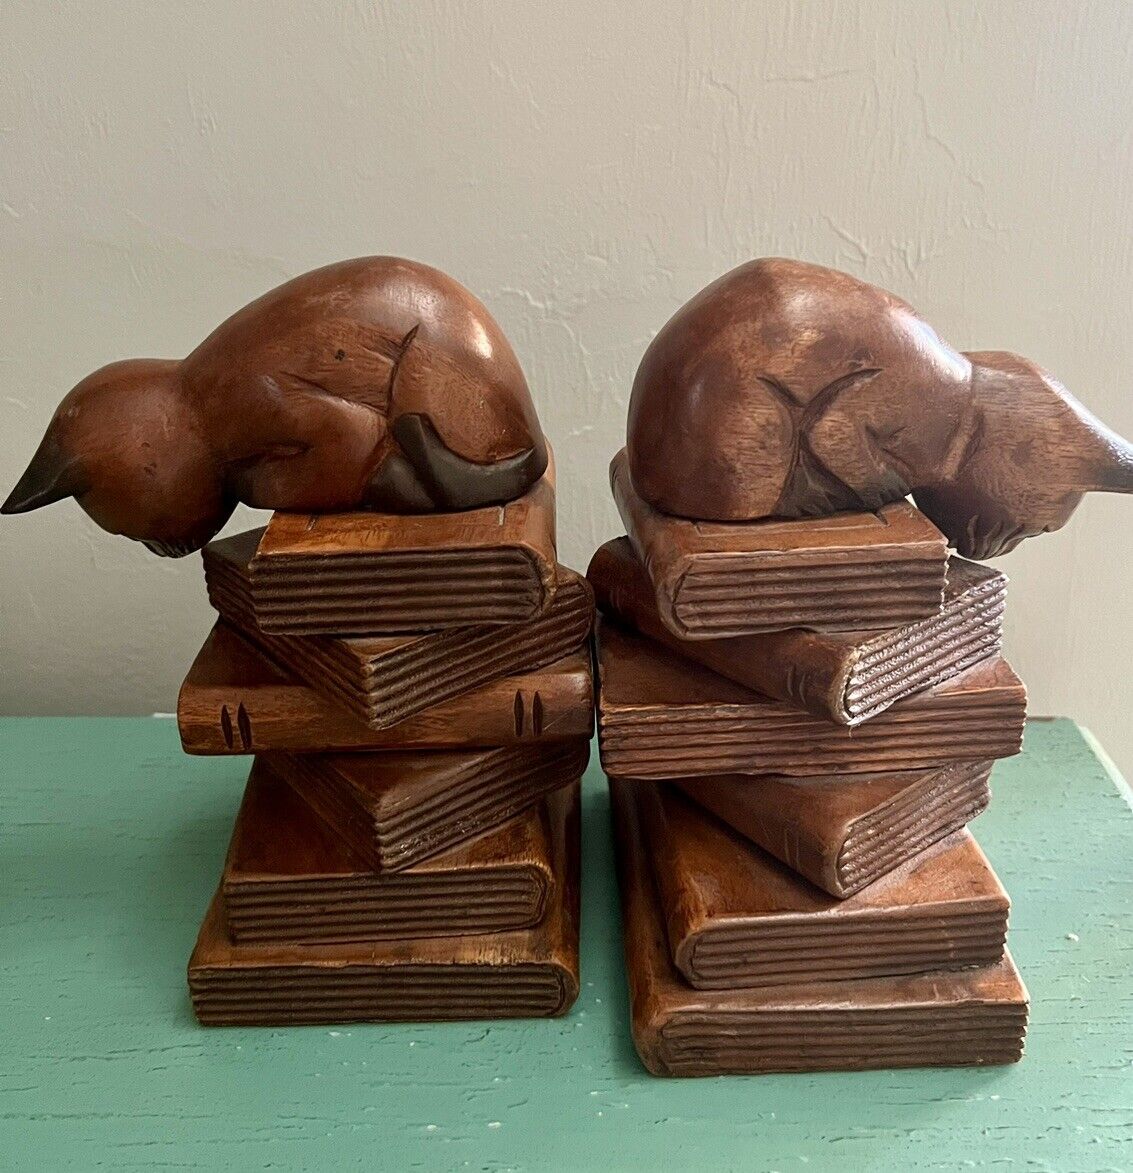 Vintage 2 Cat On The Book Stack Solid Wood Carving Sculpture Bookends